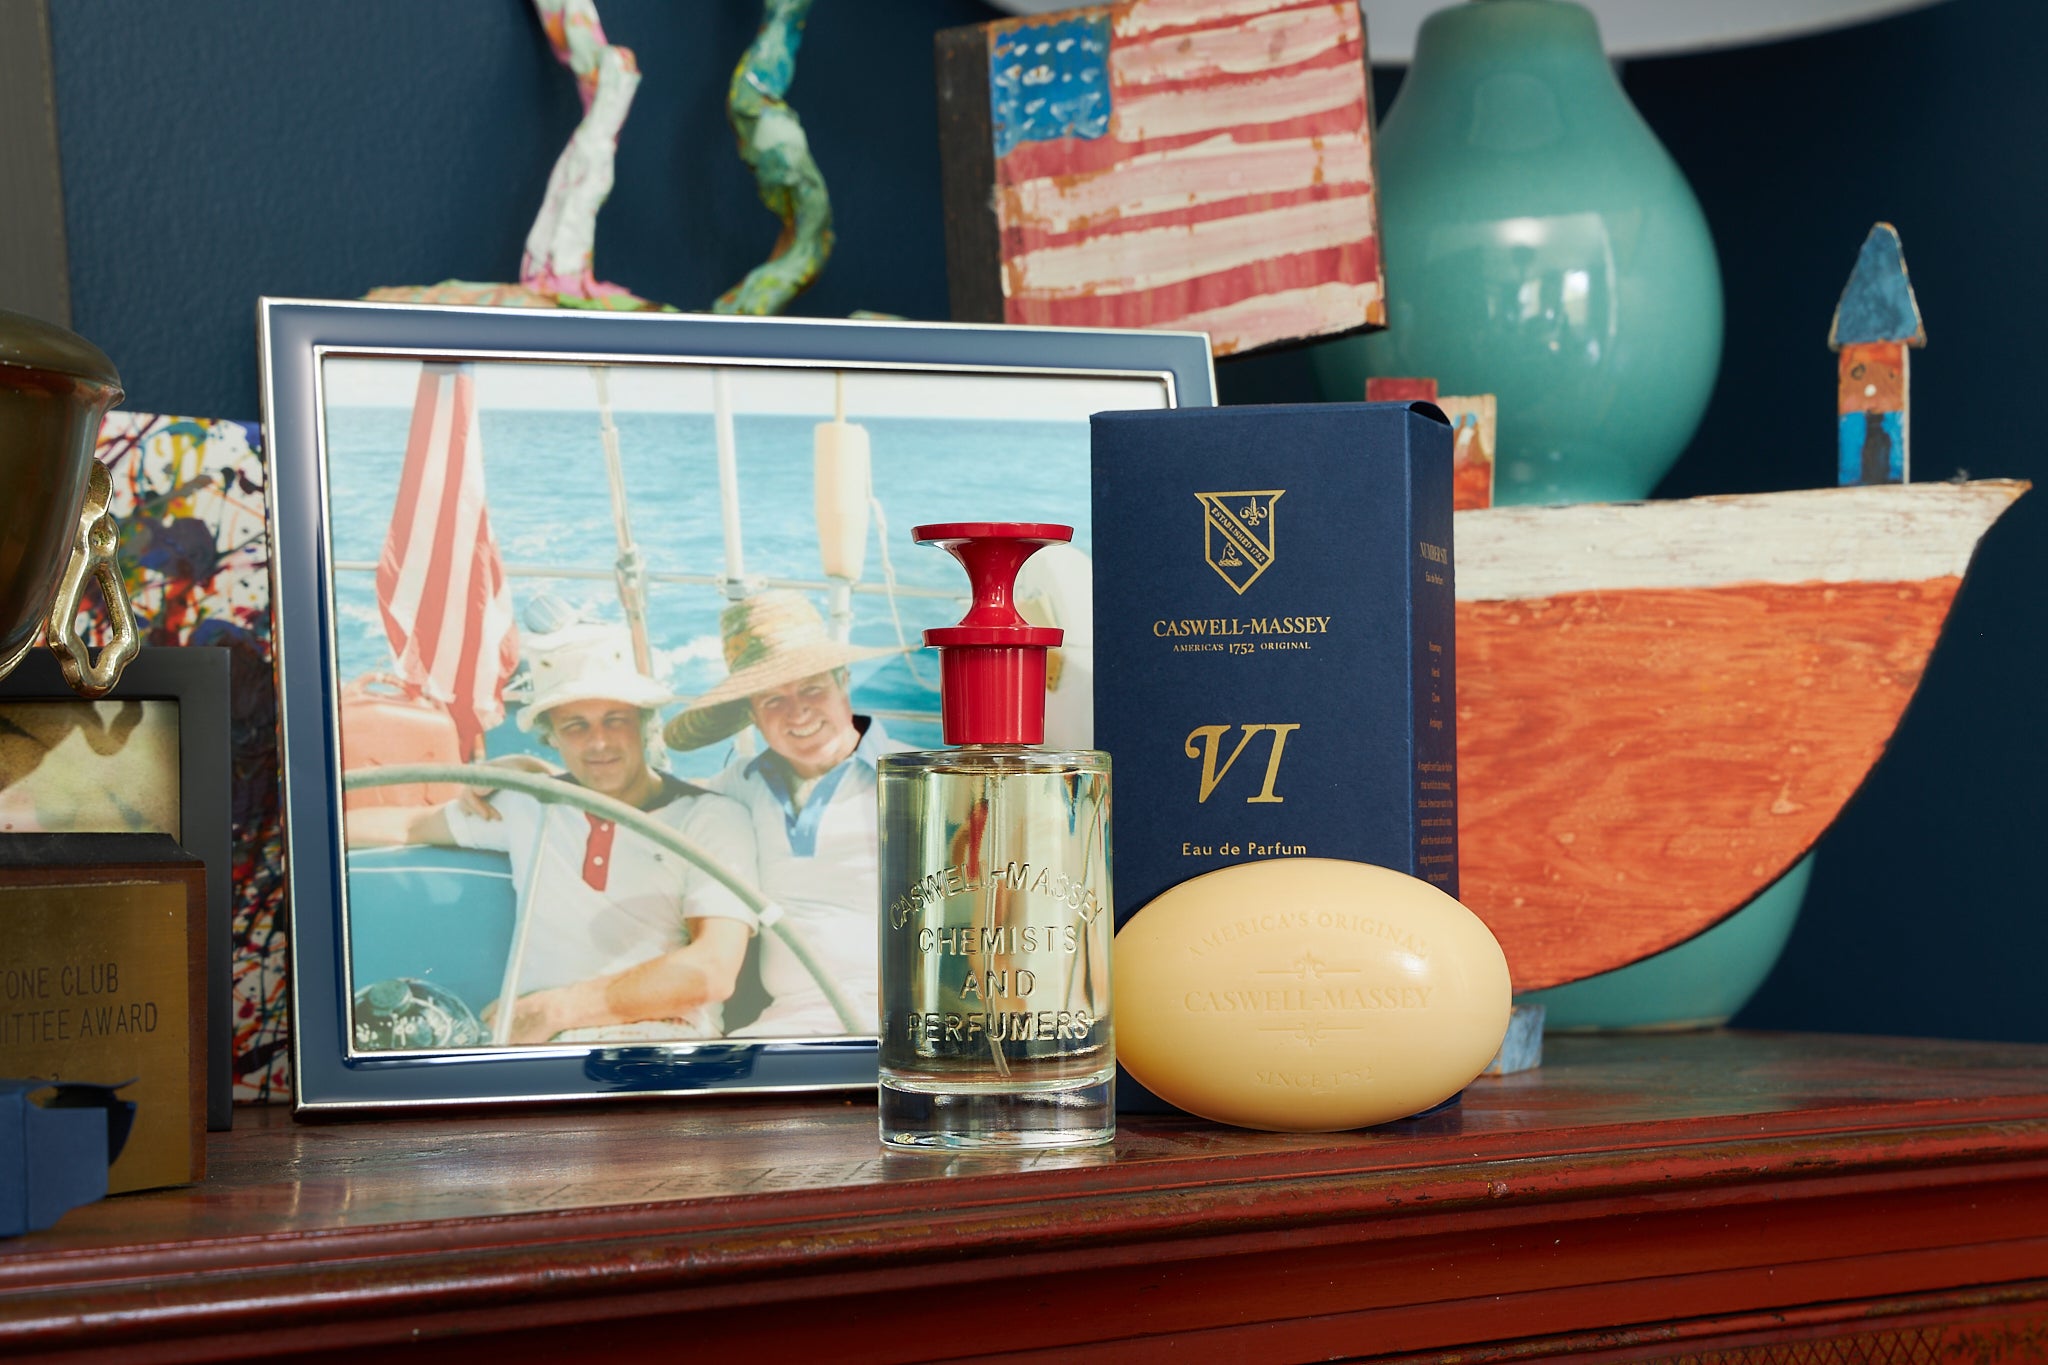 Caswell-Massey Number Six Eau de Parfum and Number Six Bar Soap shown on wood bureau with picture frame of dad and son with nautical decor behind it